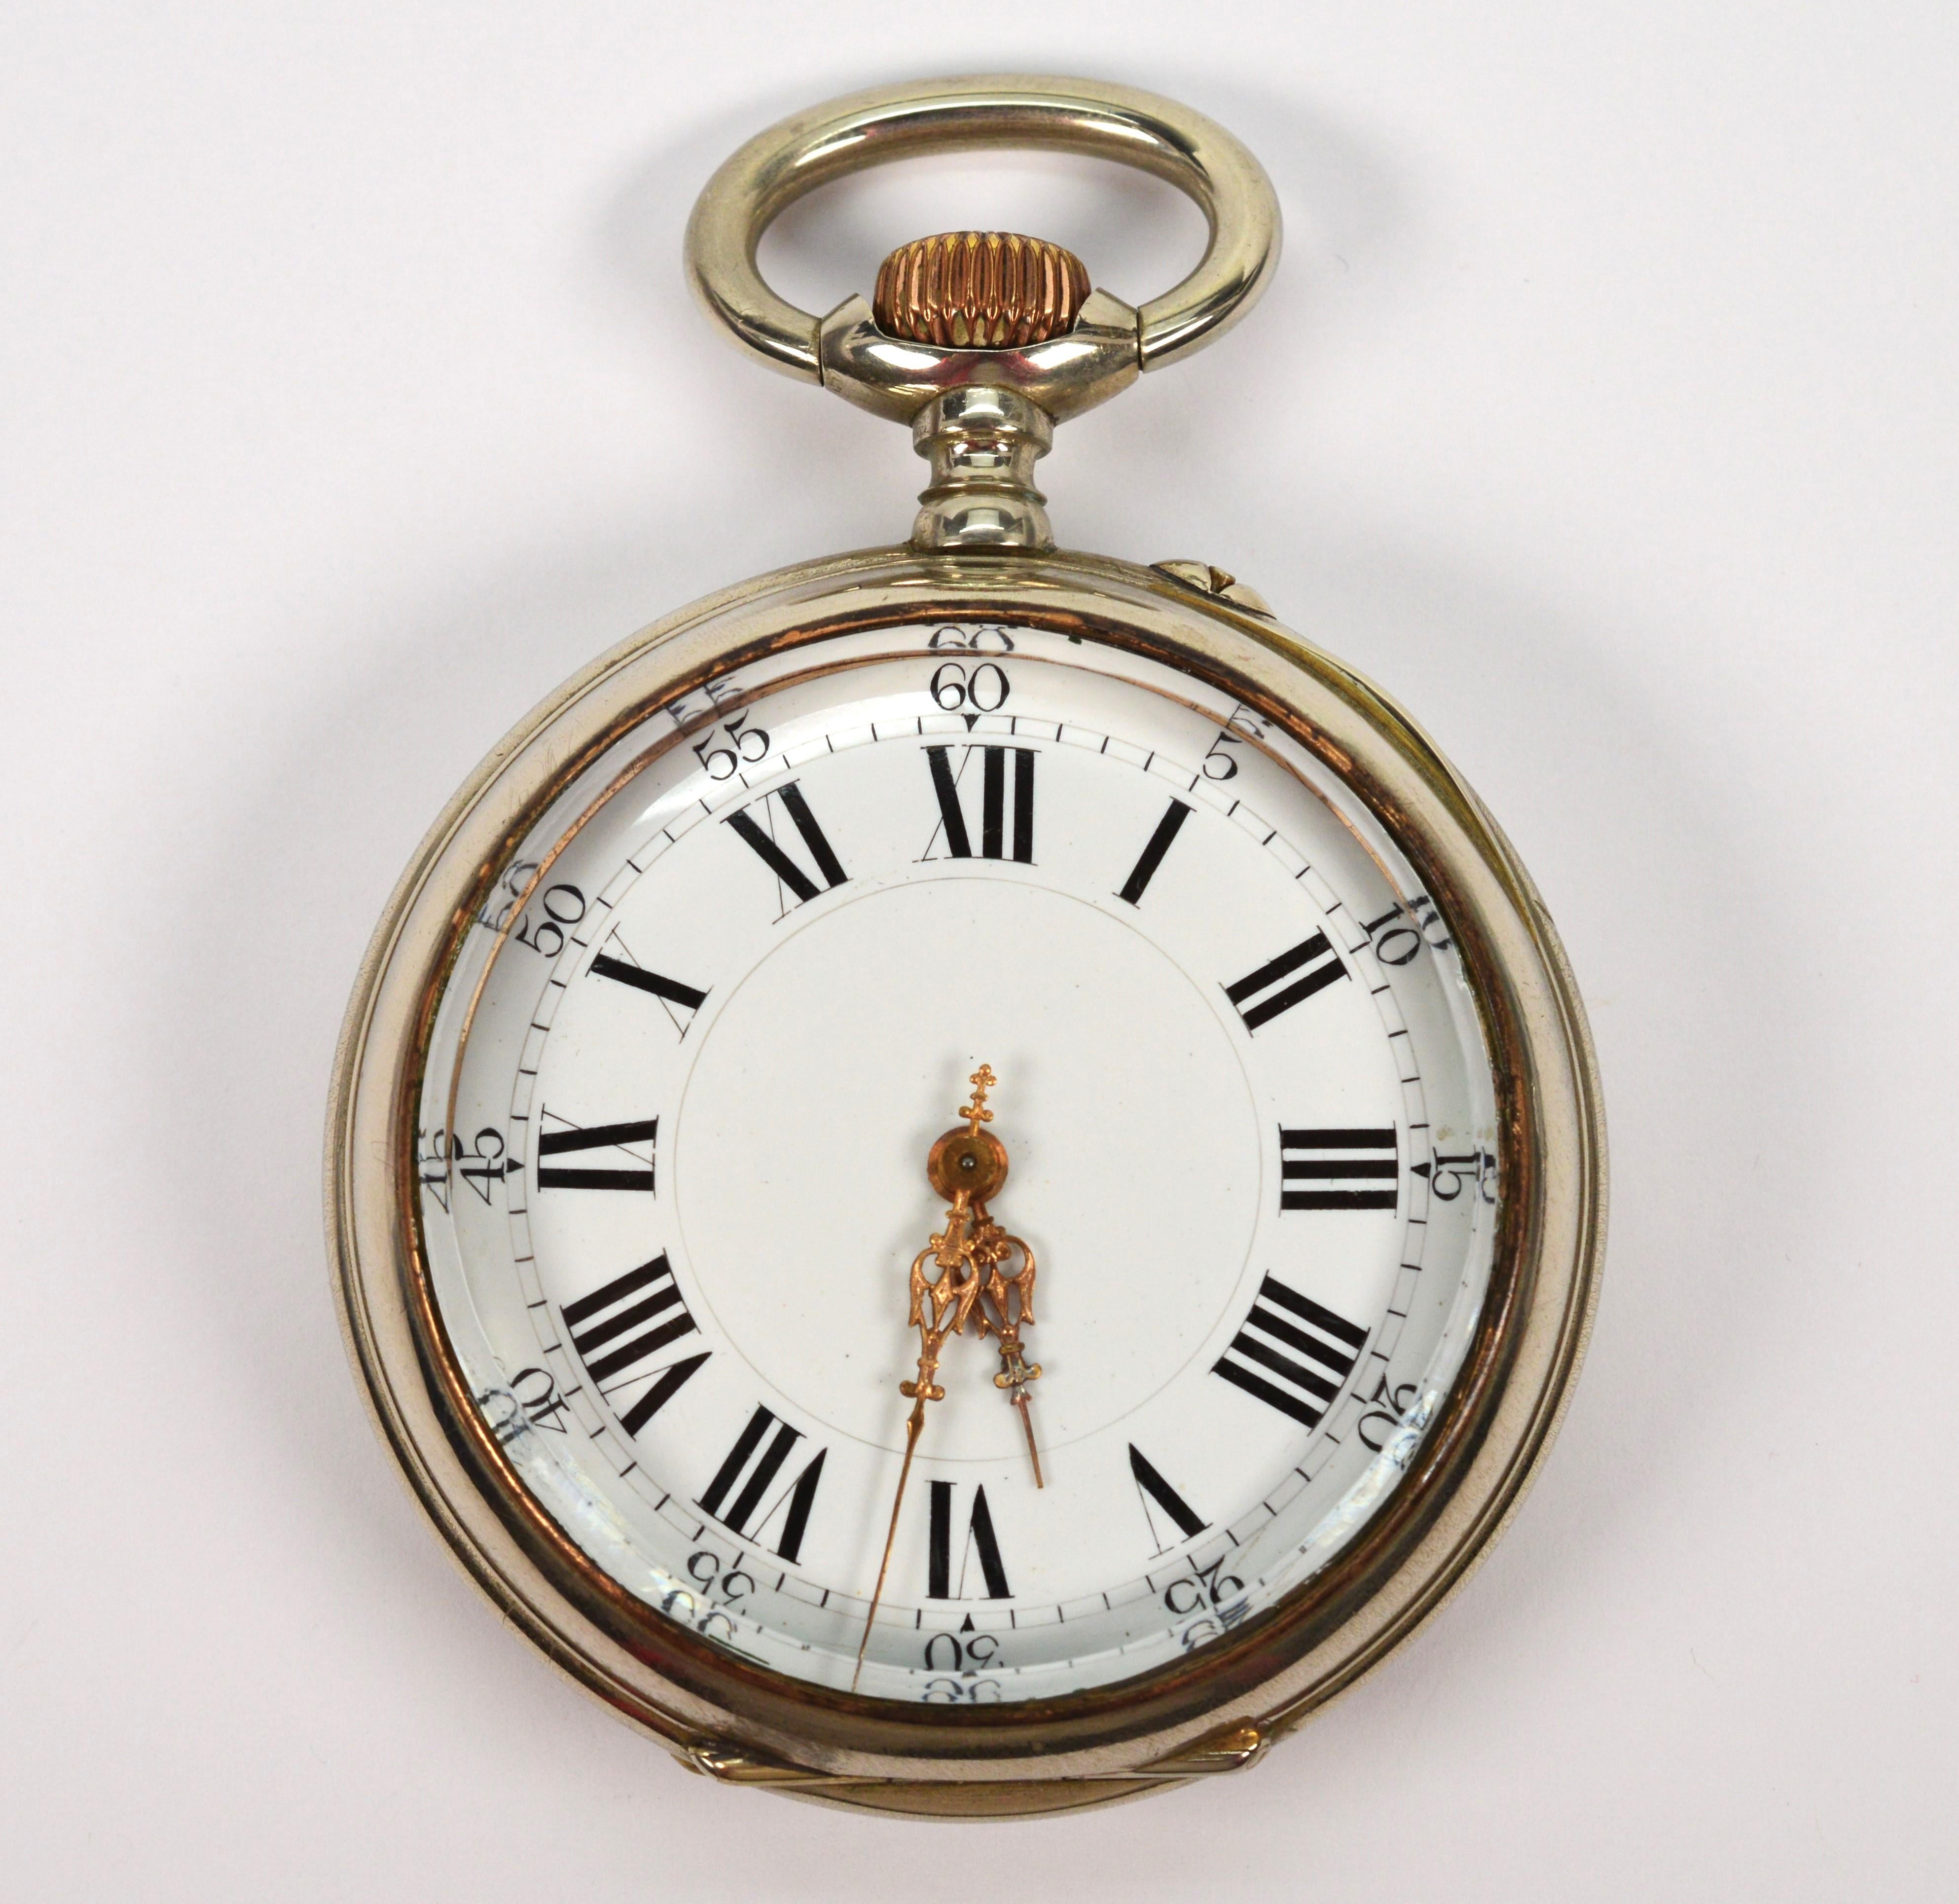 Cased in nickel, this hefty desk-size 70mm pocket watch is certainly impressive. With a bright brass crown, this large robust palm-size  2-5/8 inch round pocket watch has a nickel outer back case #607954 and a open front crystal display. It's